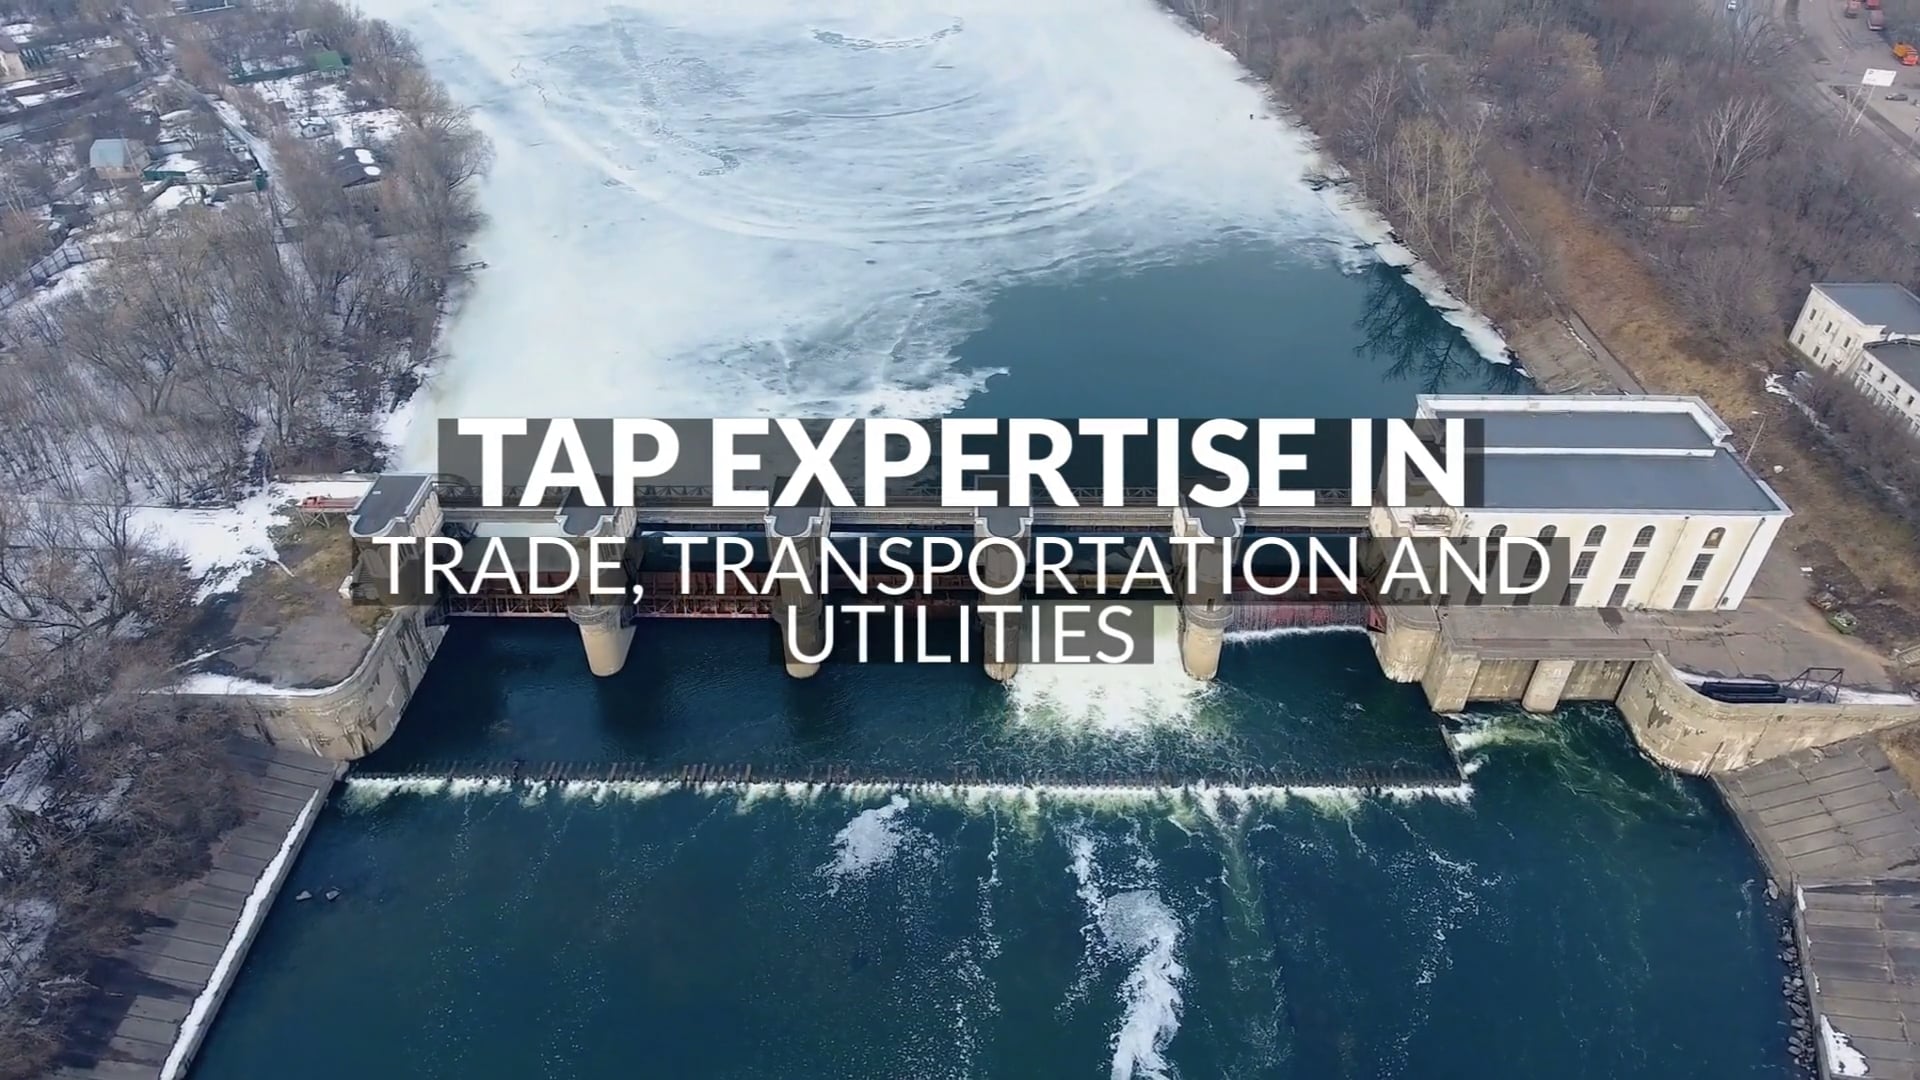 SUBJECT MATTER EXPERTS IN TRADE TRANSPORTATION AND UTILITIES